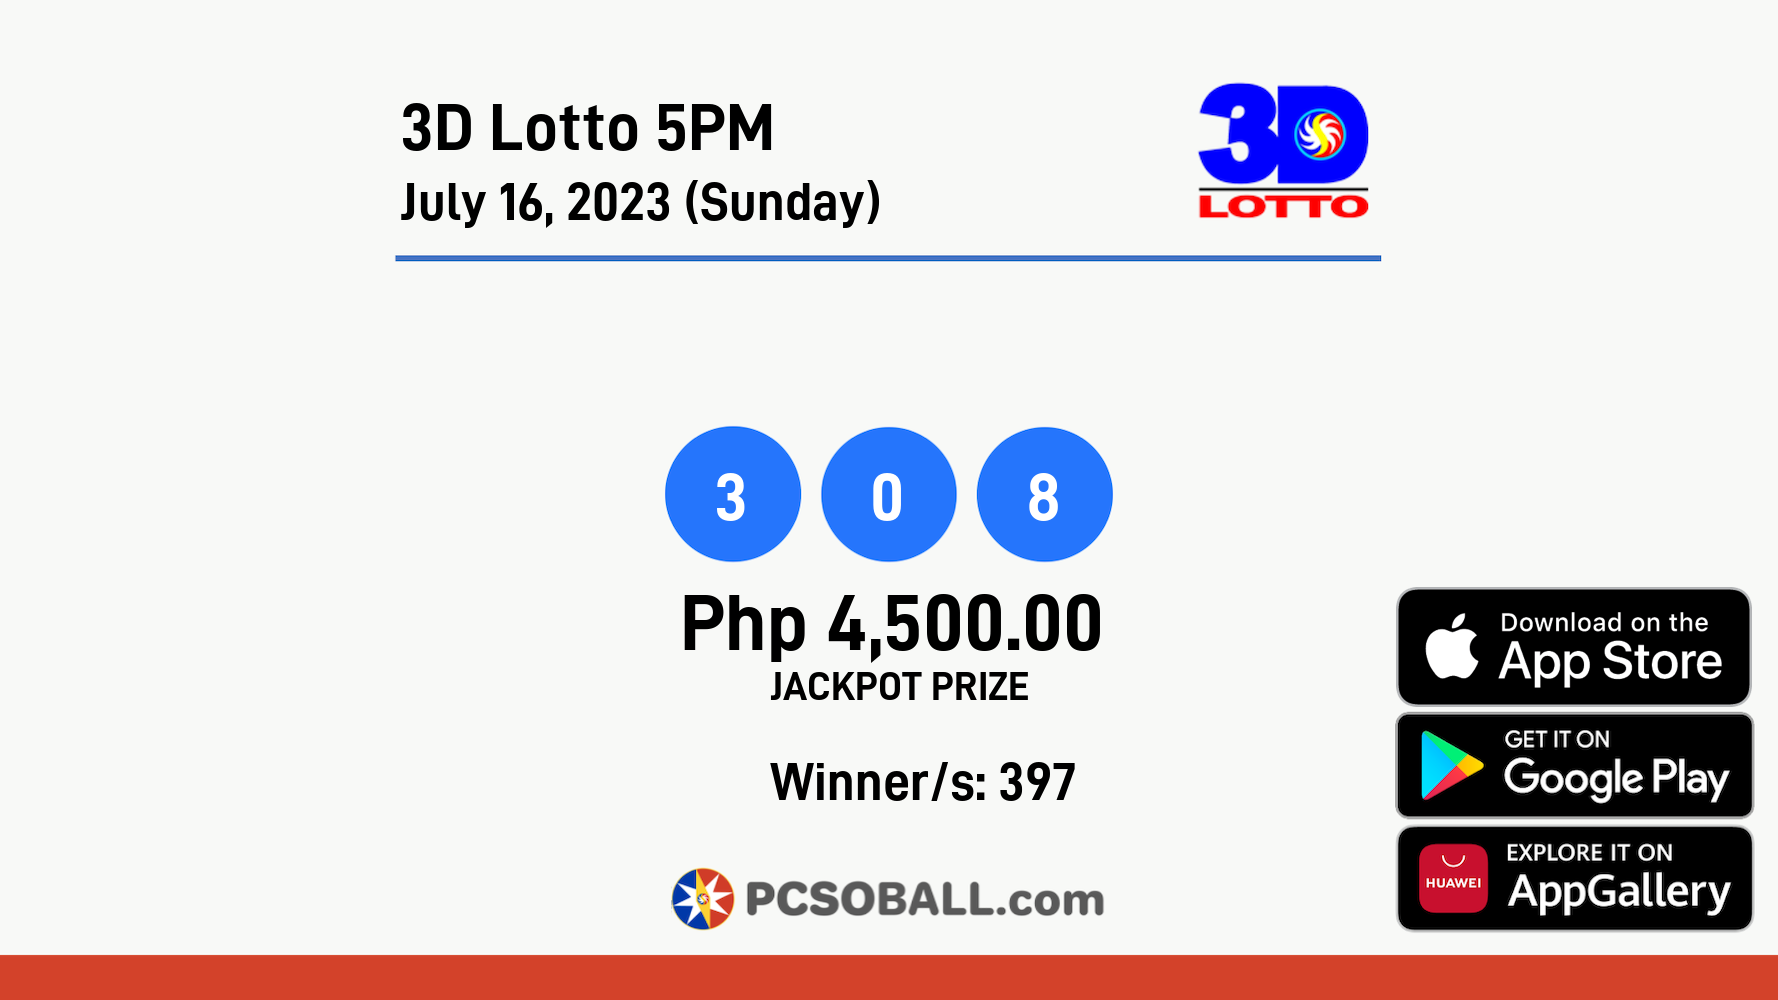 3D Lotto 5PM July 16, 2023 (Sunday) Result